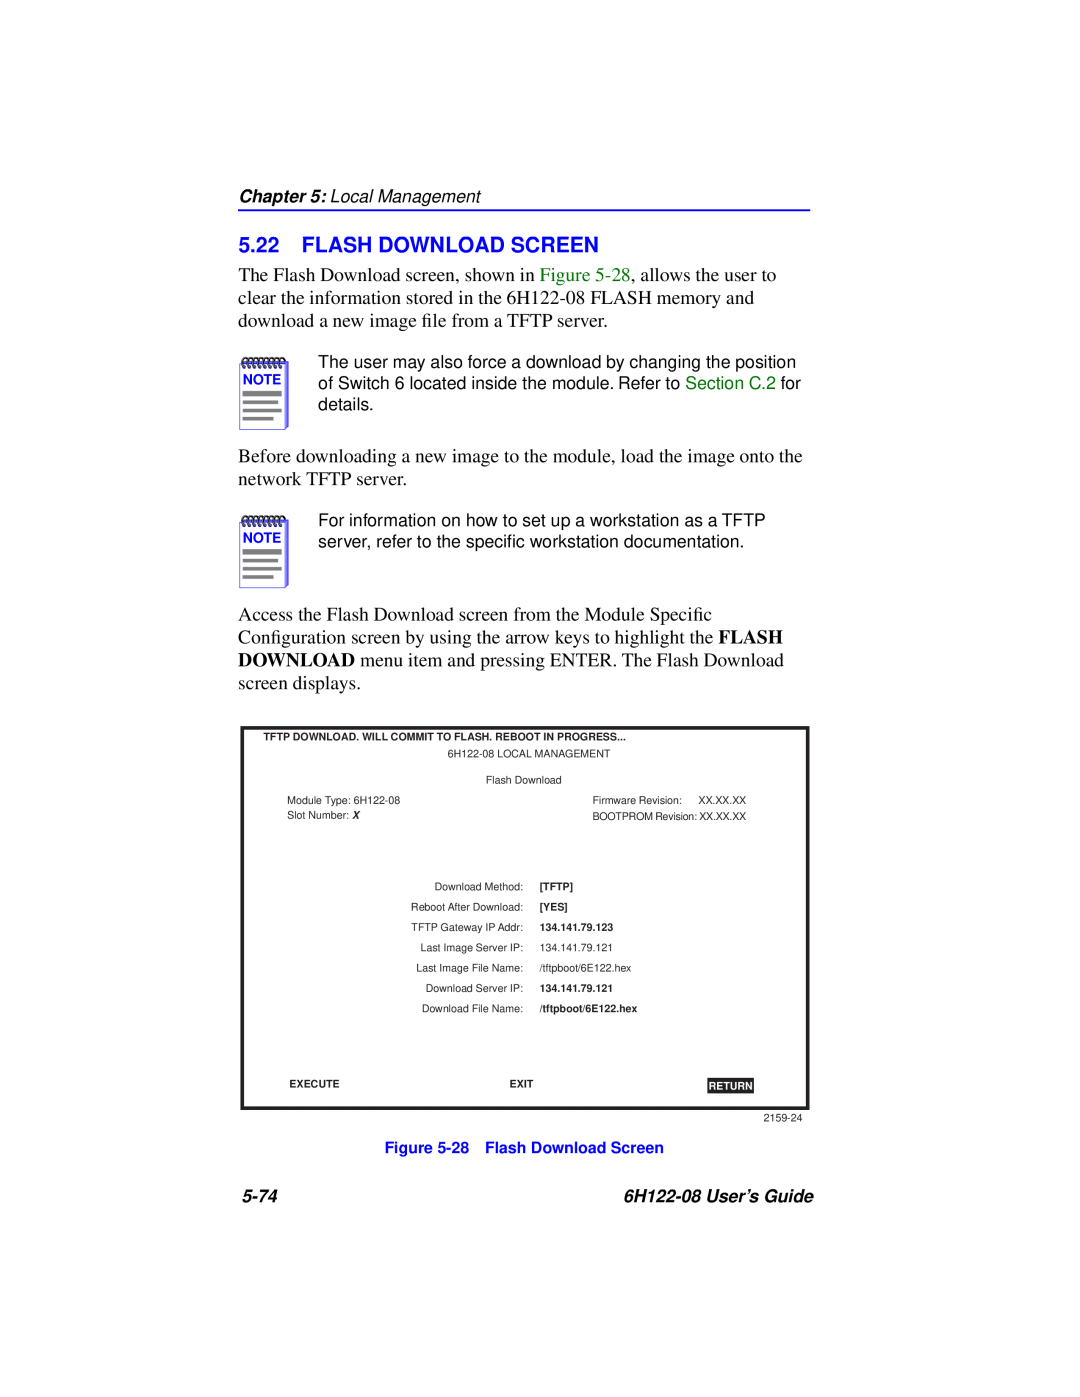 Cabletron Systems 6H122-08 manual 28 Flash Download Screen 